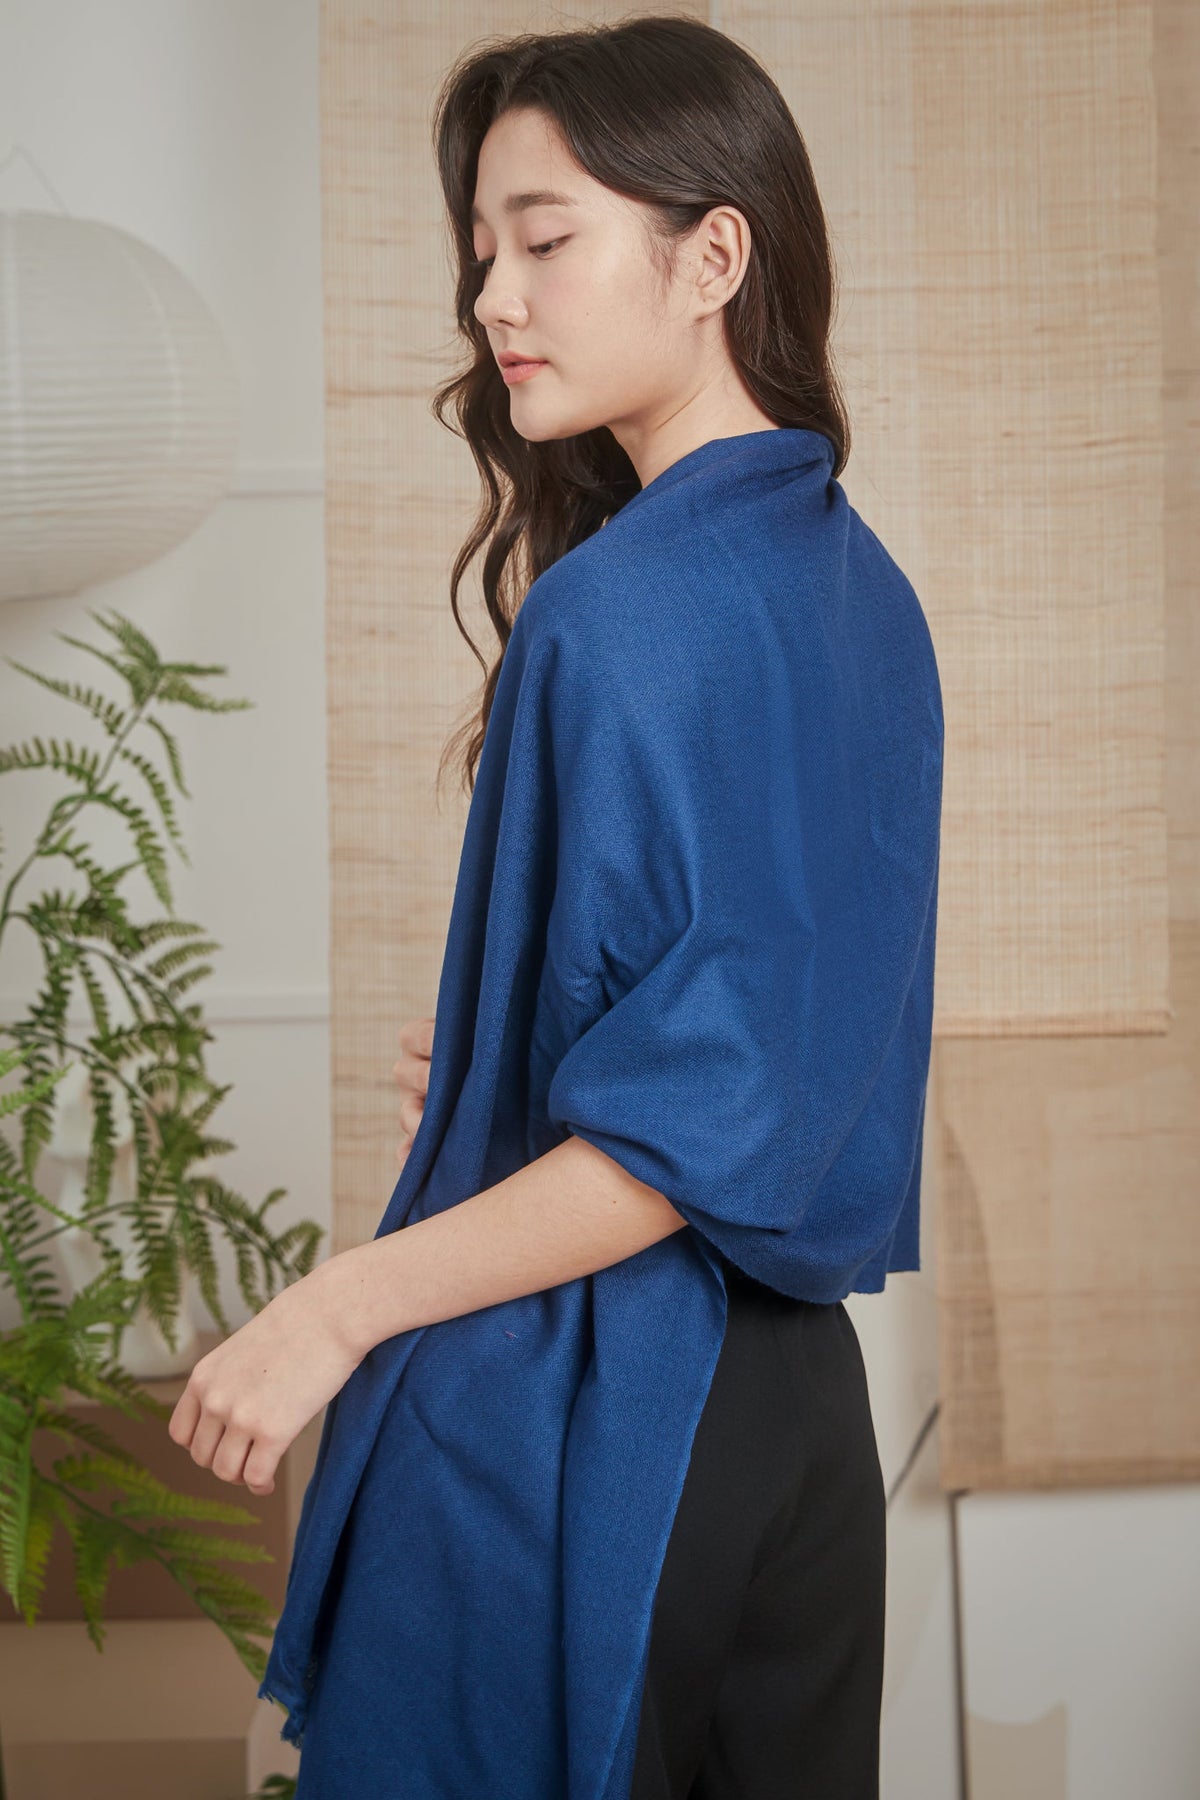 Restocked* Luxe Cashmere Shawl in Royal Blue